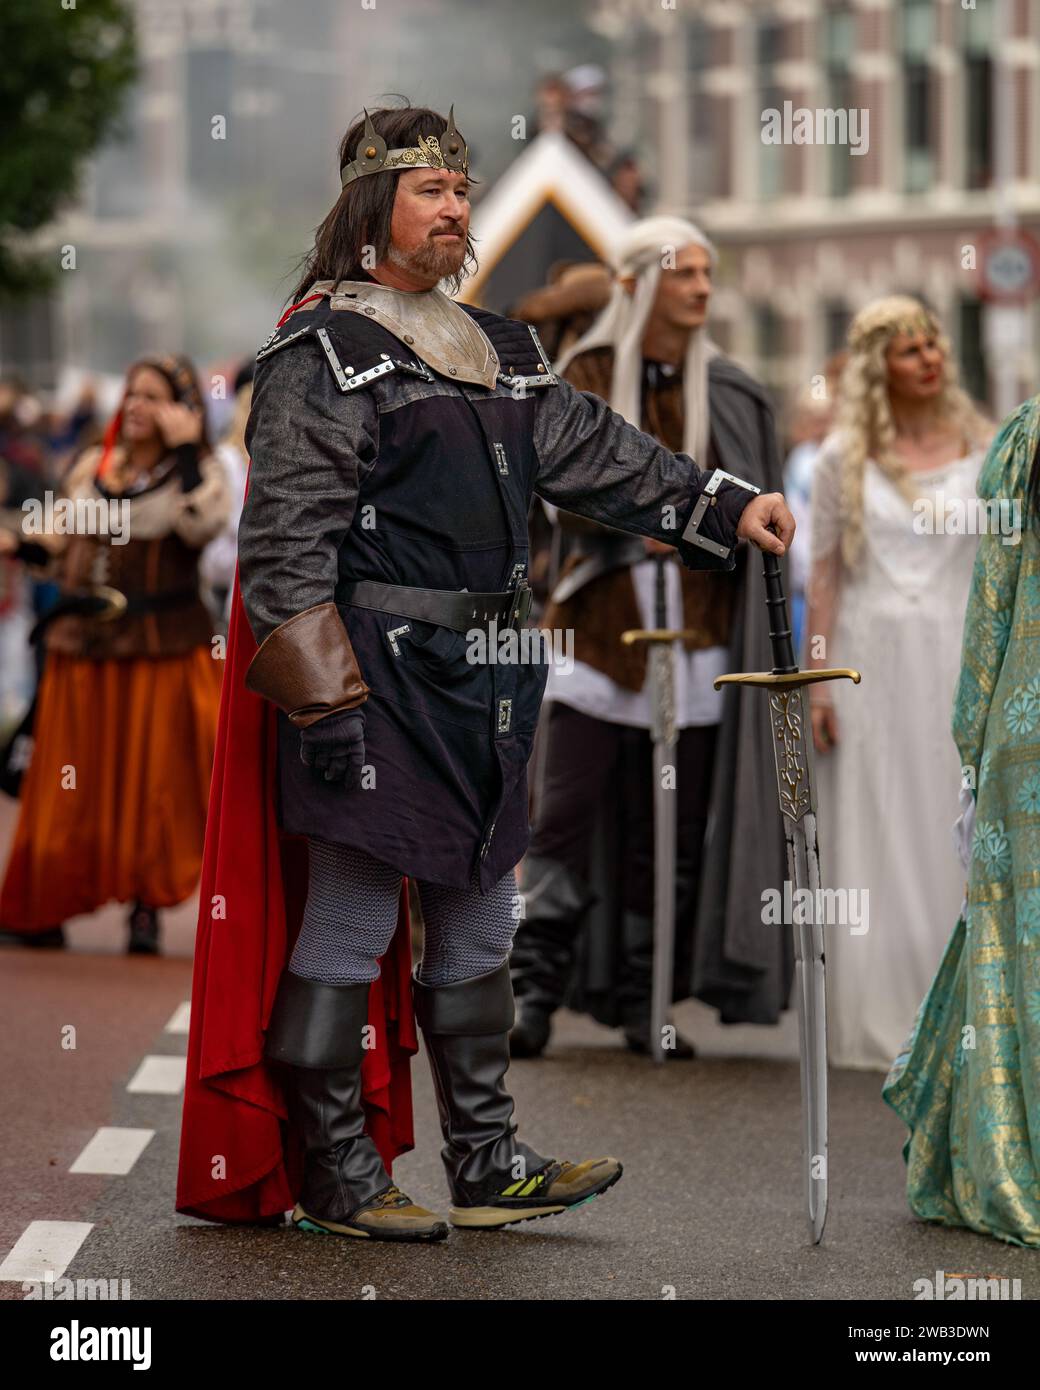 A Caucasian man in a medieval costume marching at a parade in Leiden, Netherlands Stock Photo